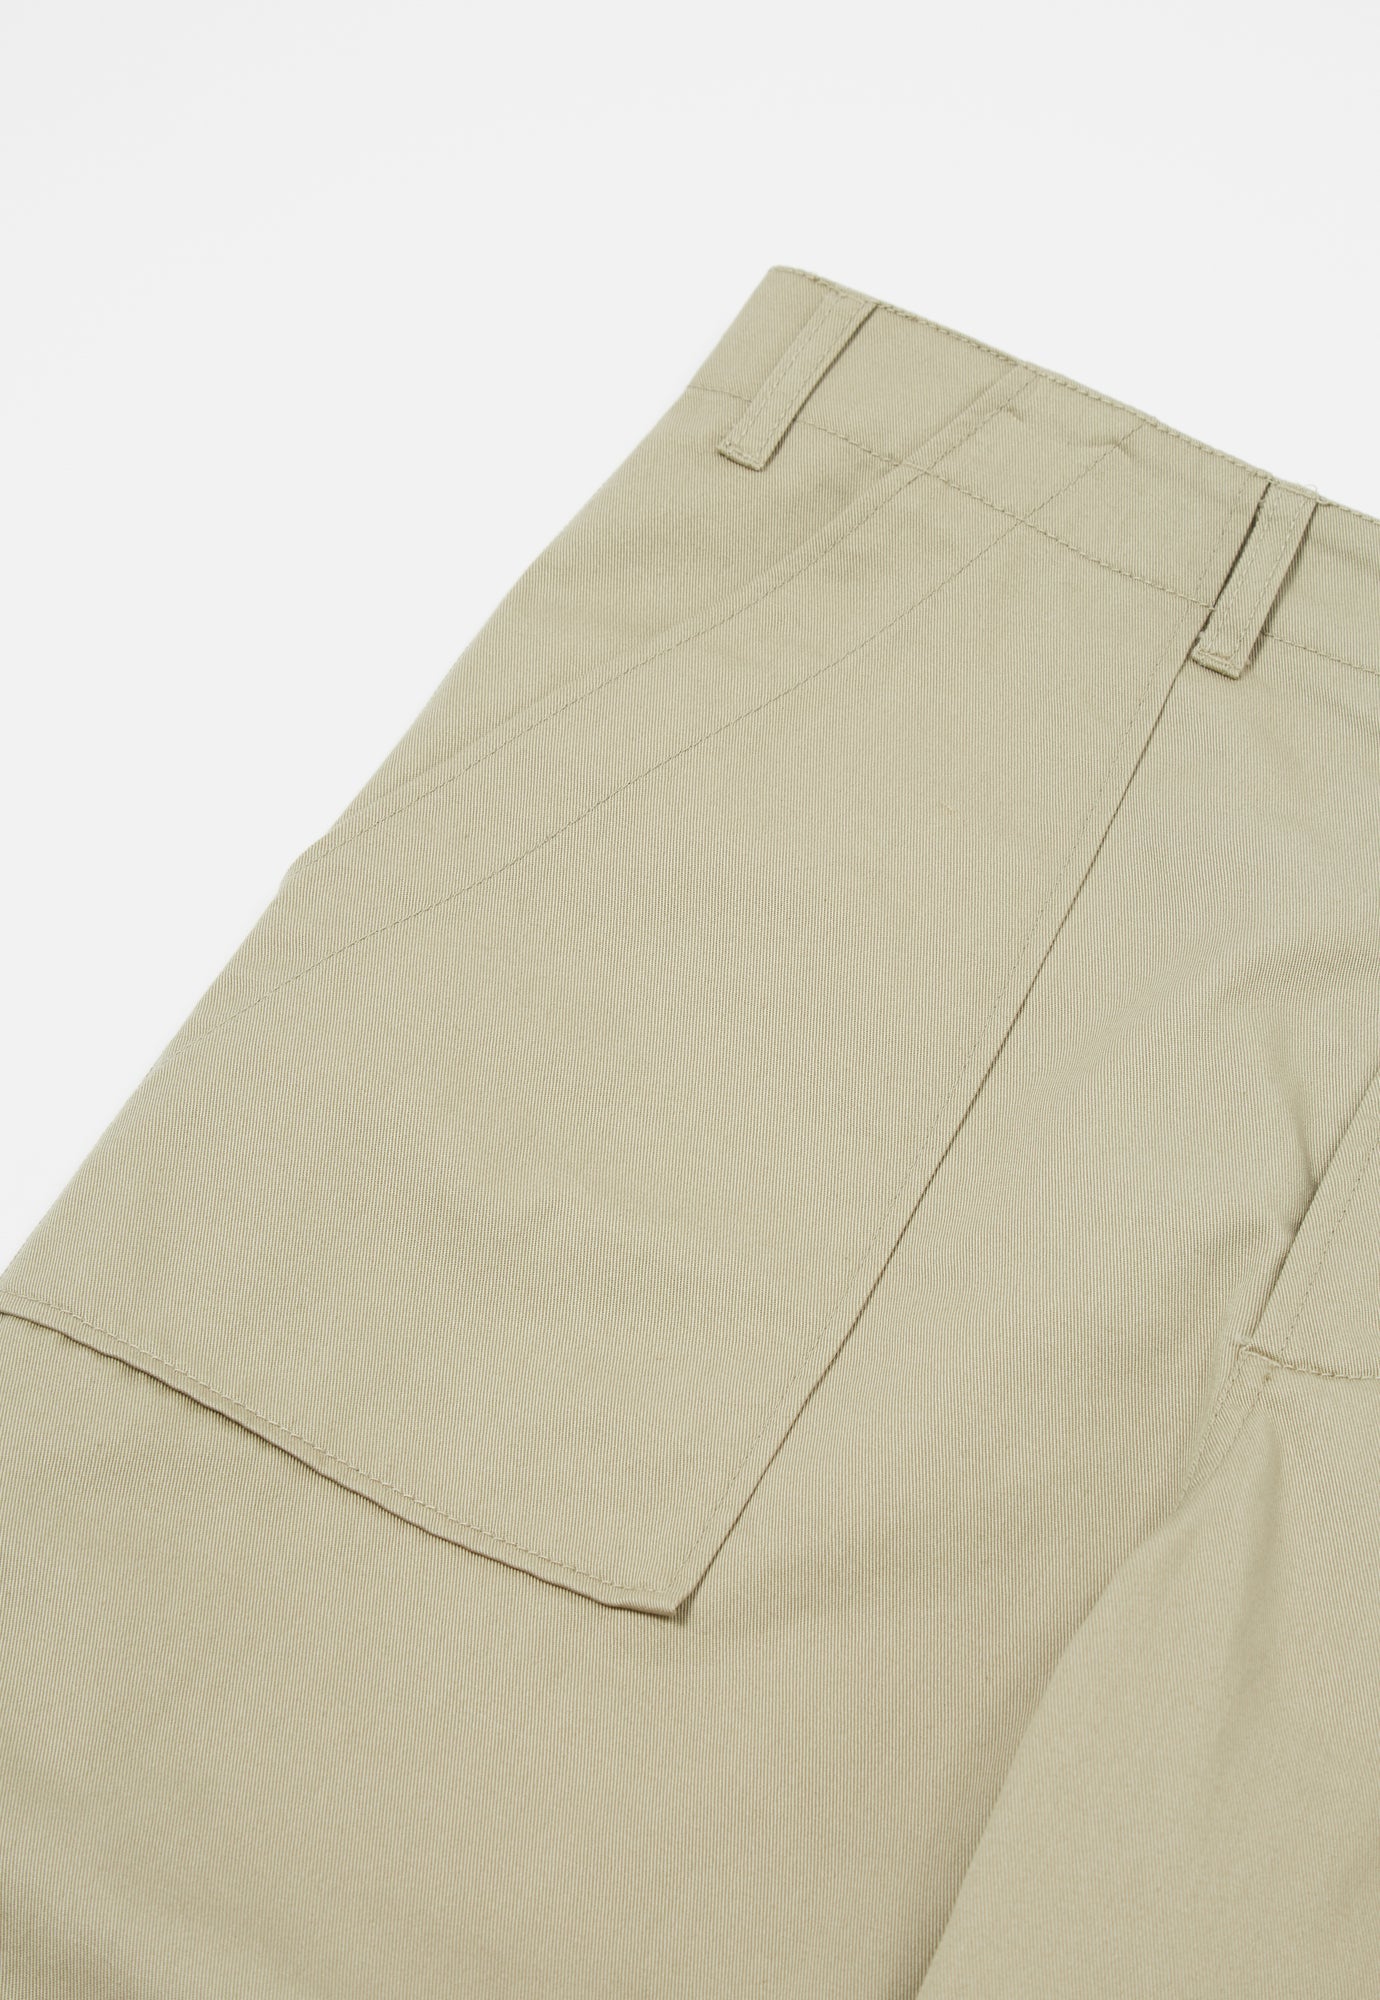 Universal Works Fatigue Pant in Stone Twill